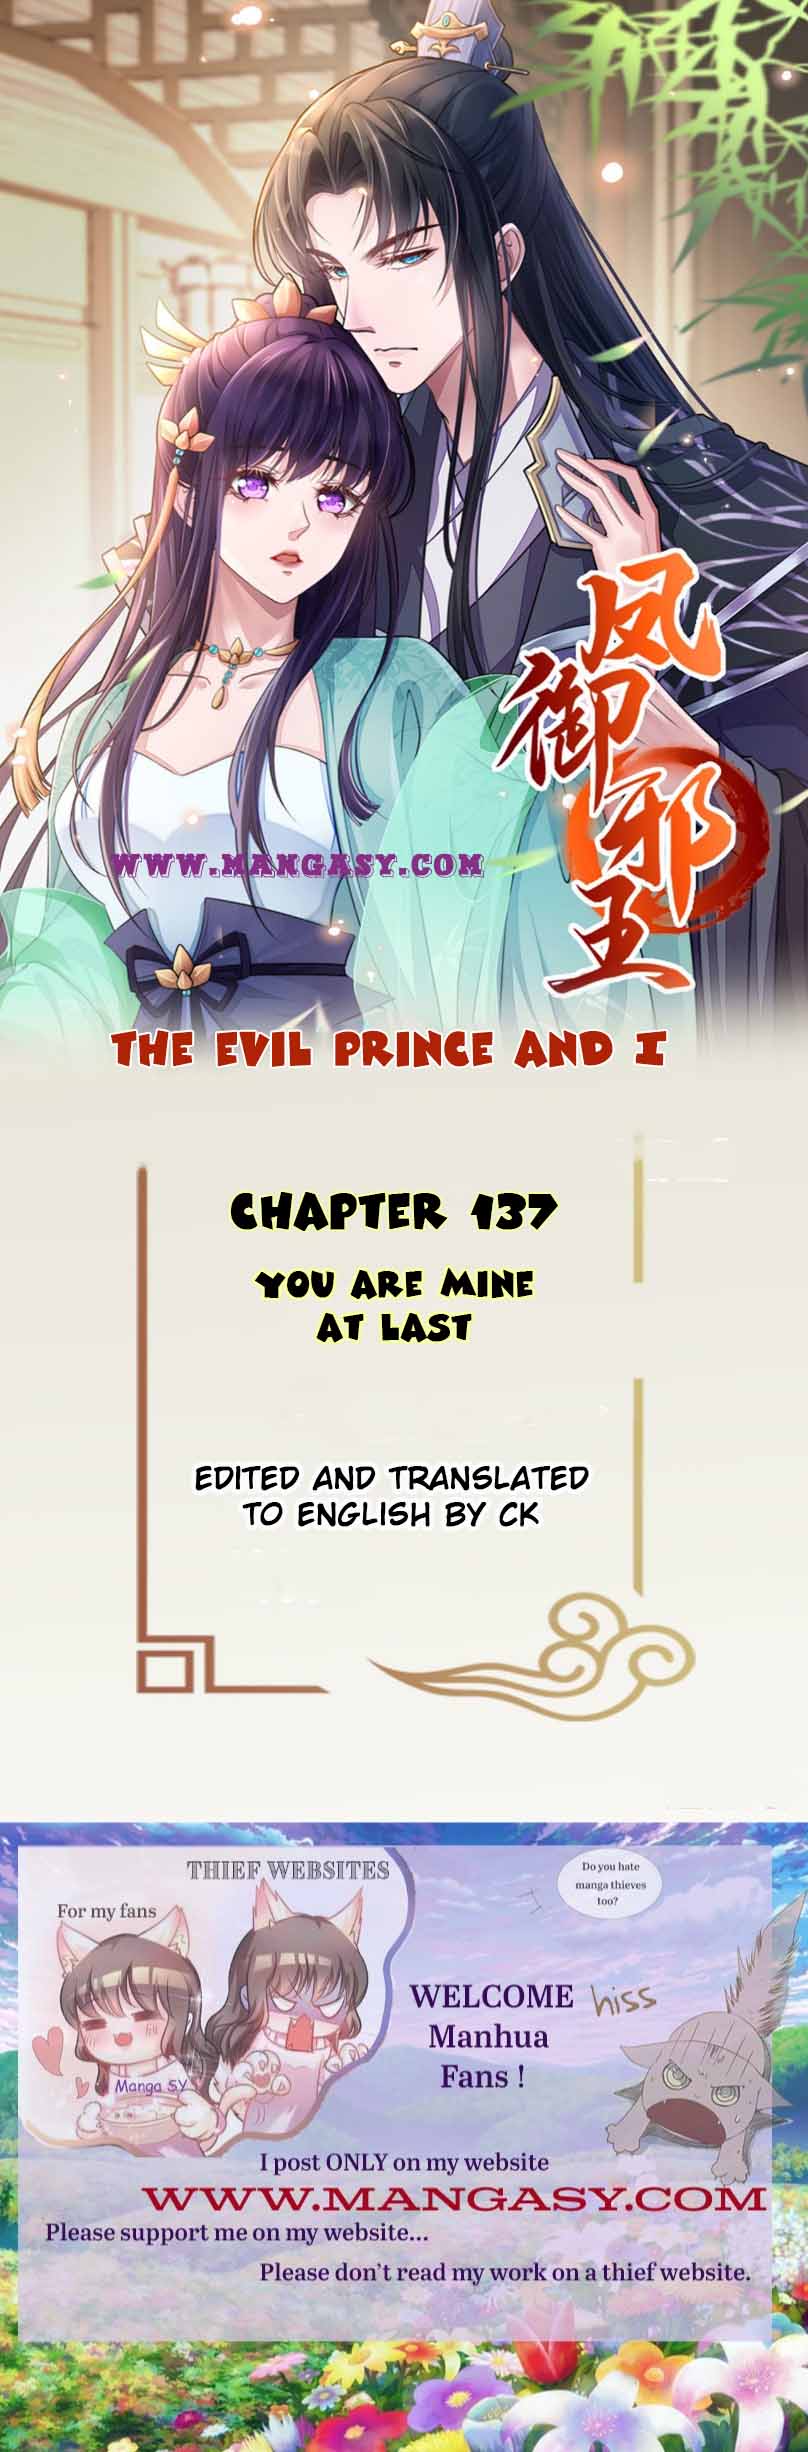 The Evil Prince And I - Page 2